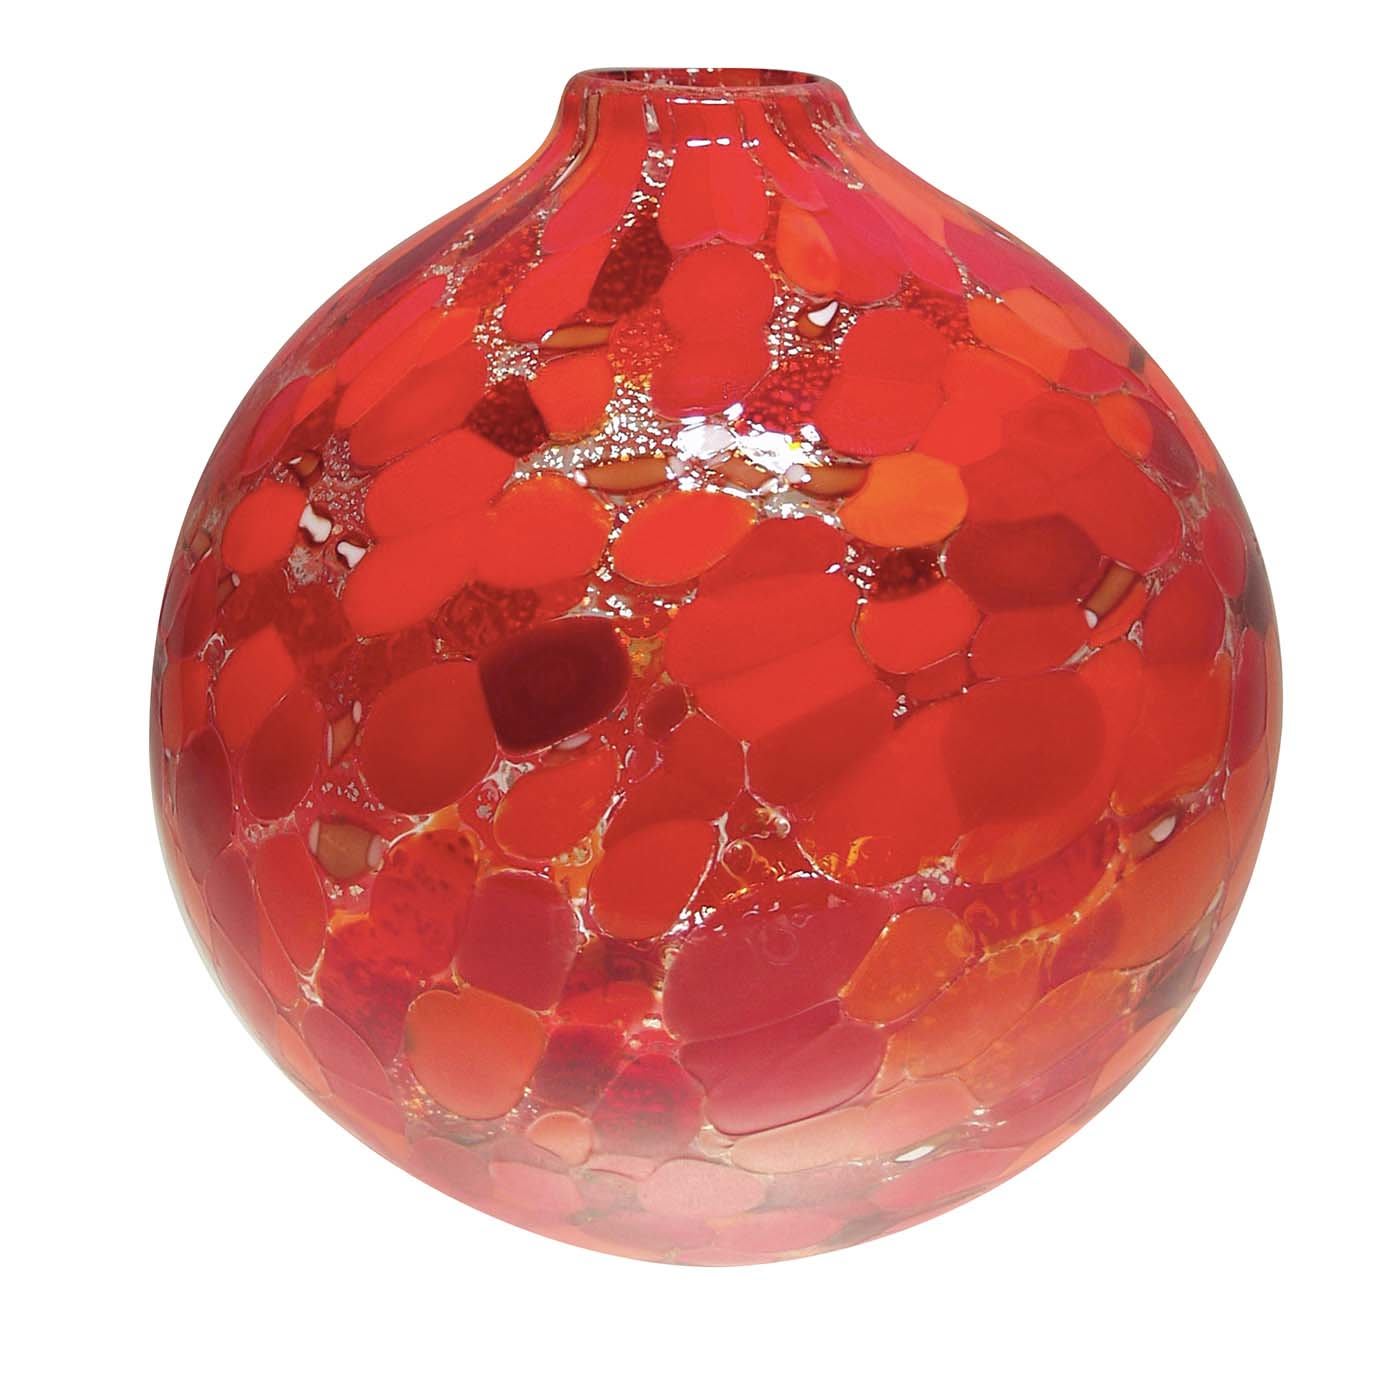 Canal Grande Red Vase - Murano Glam